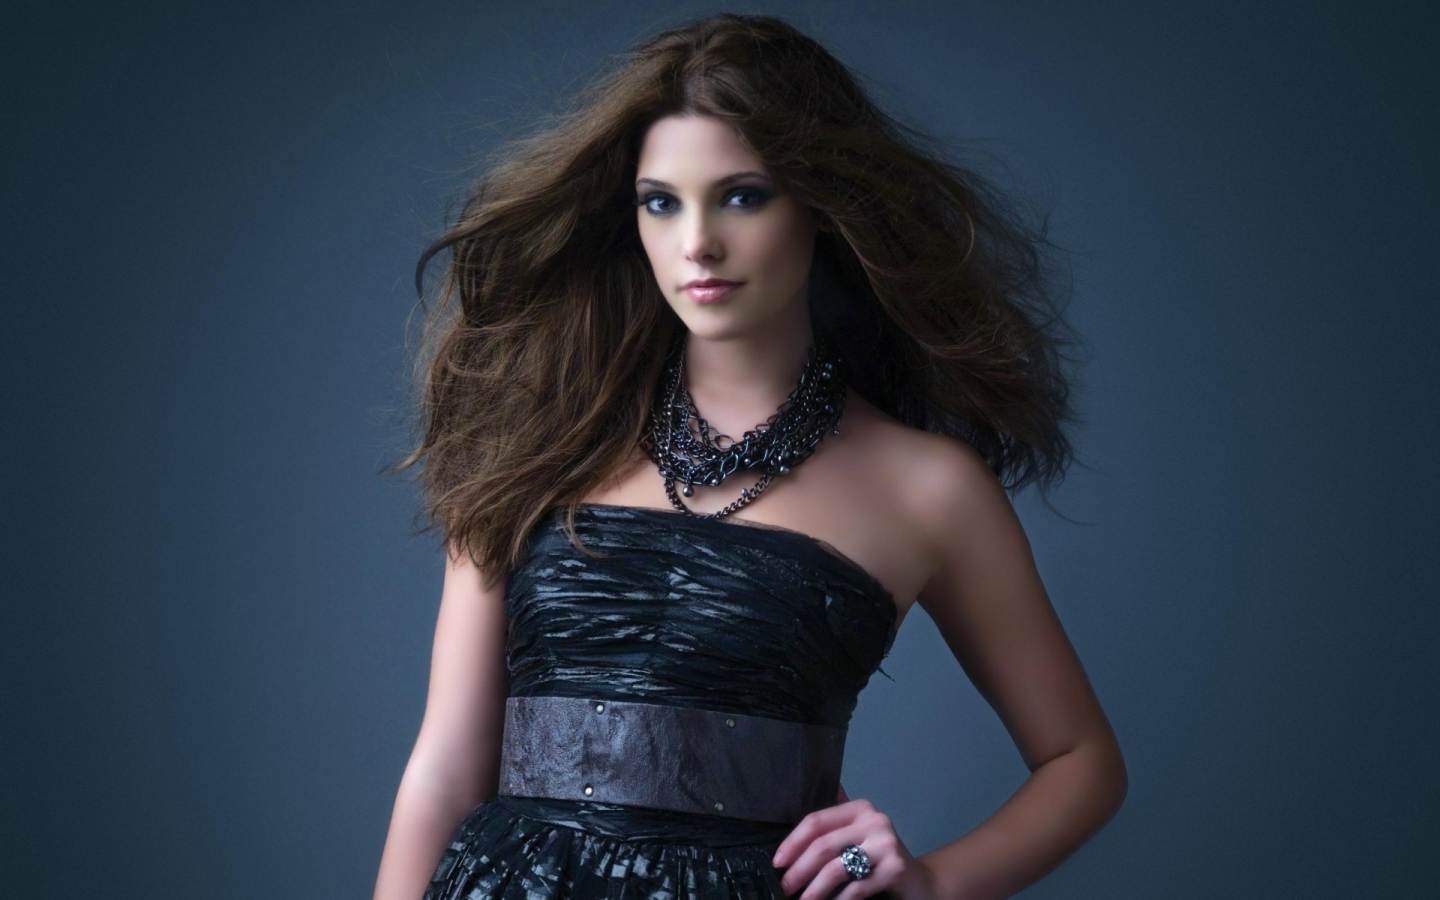 Ashley Greene Look for 1440 x 900 widescreen resolution